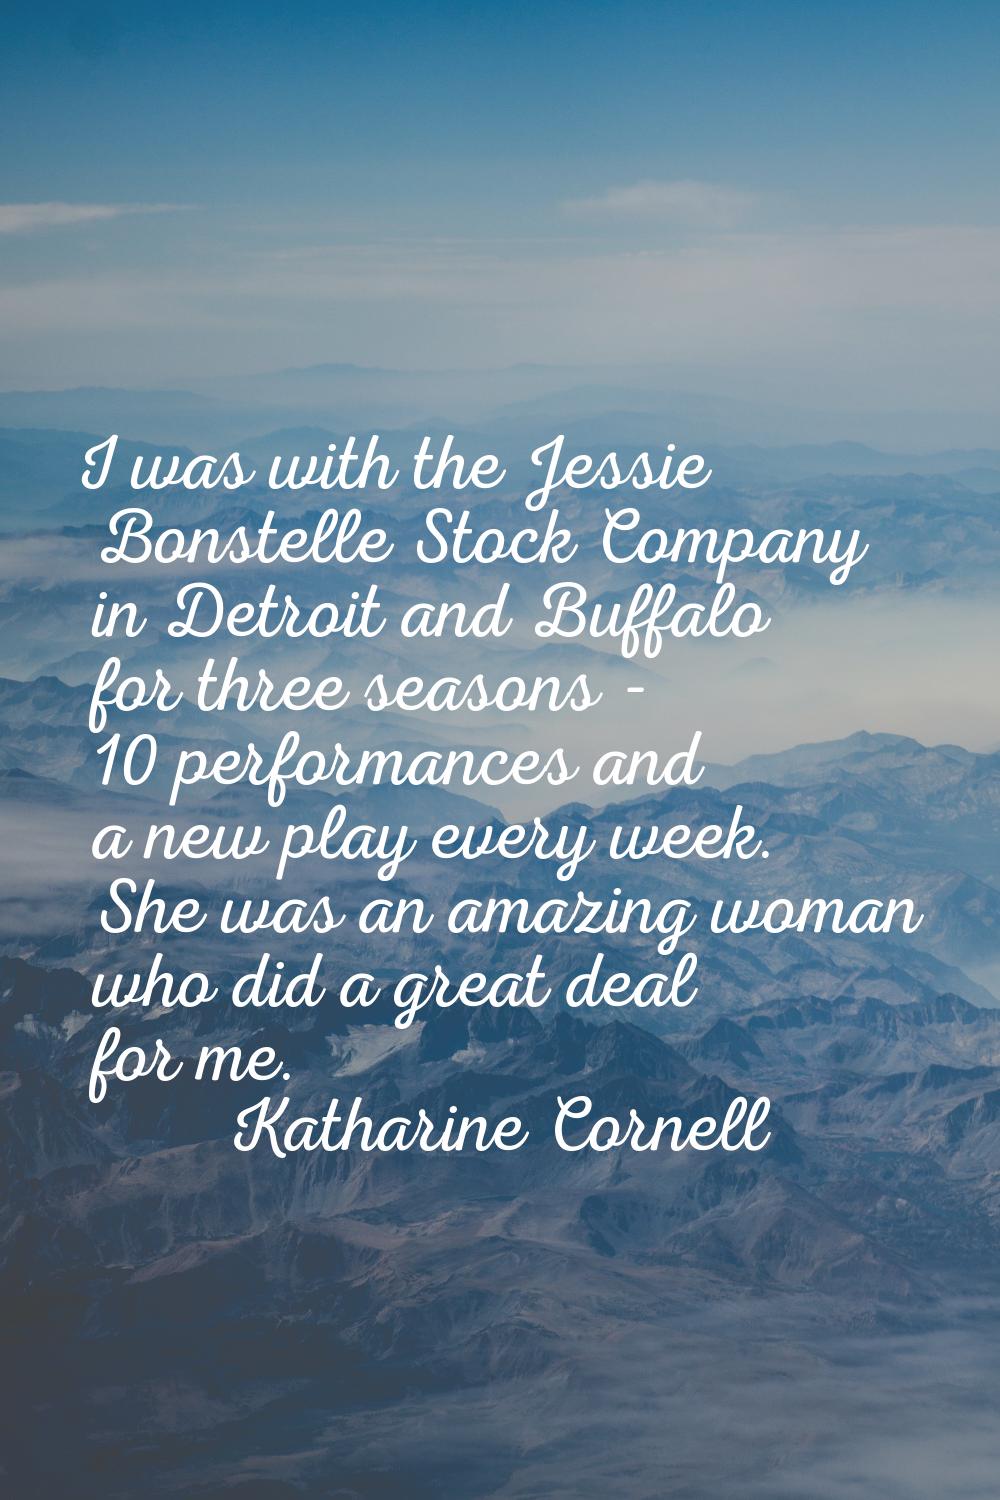 I was with the Jessie Bonstelle Stock Company in Detroit and Buffalo for three seasons - 10 perform